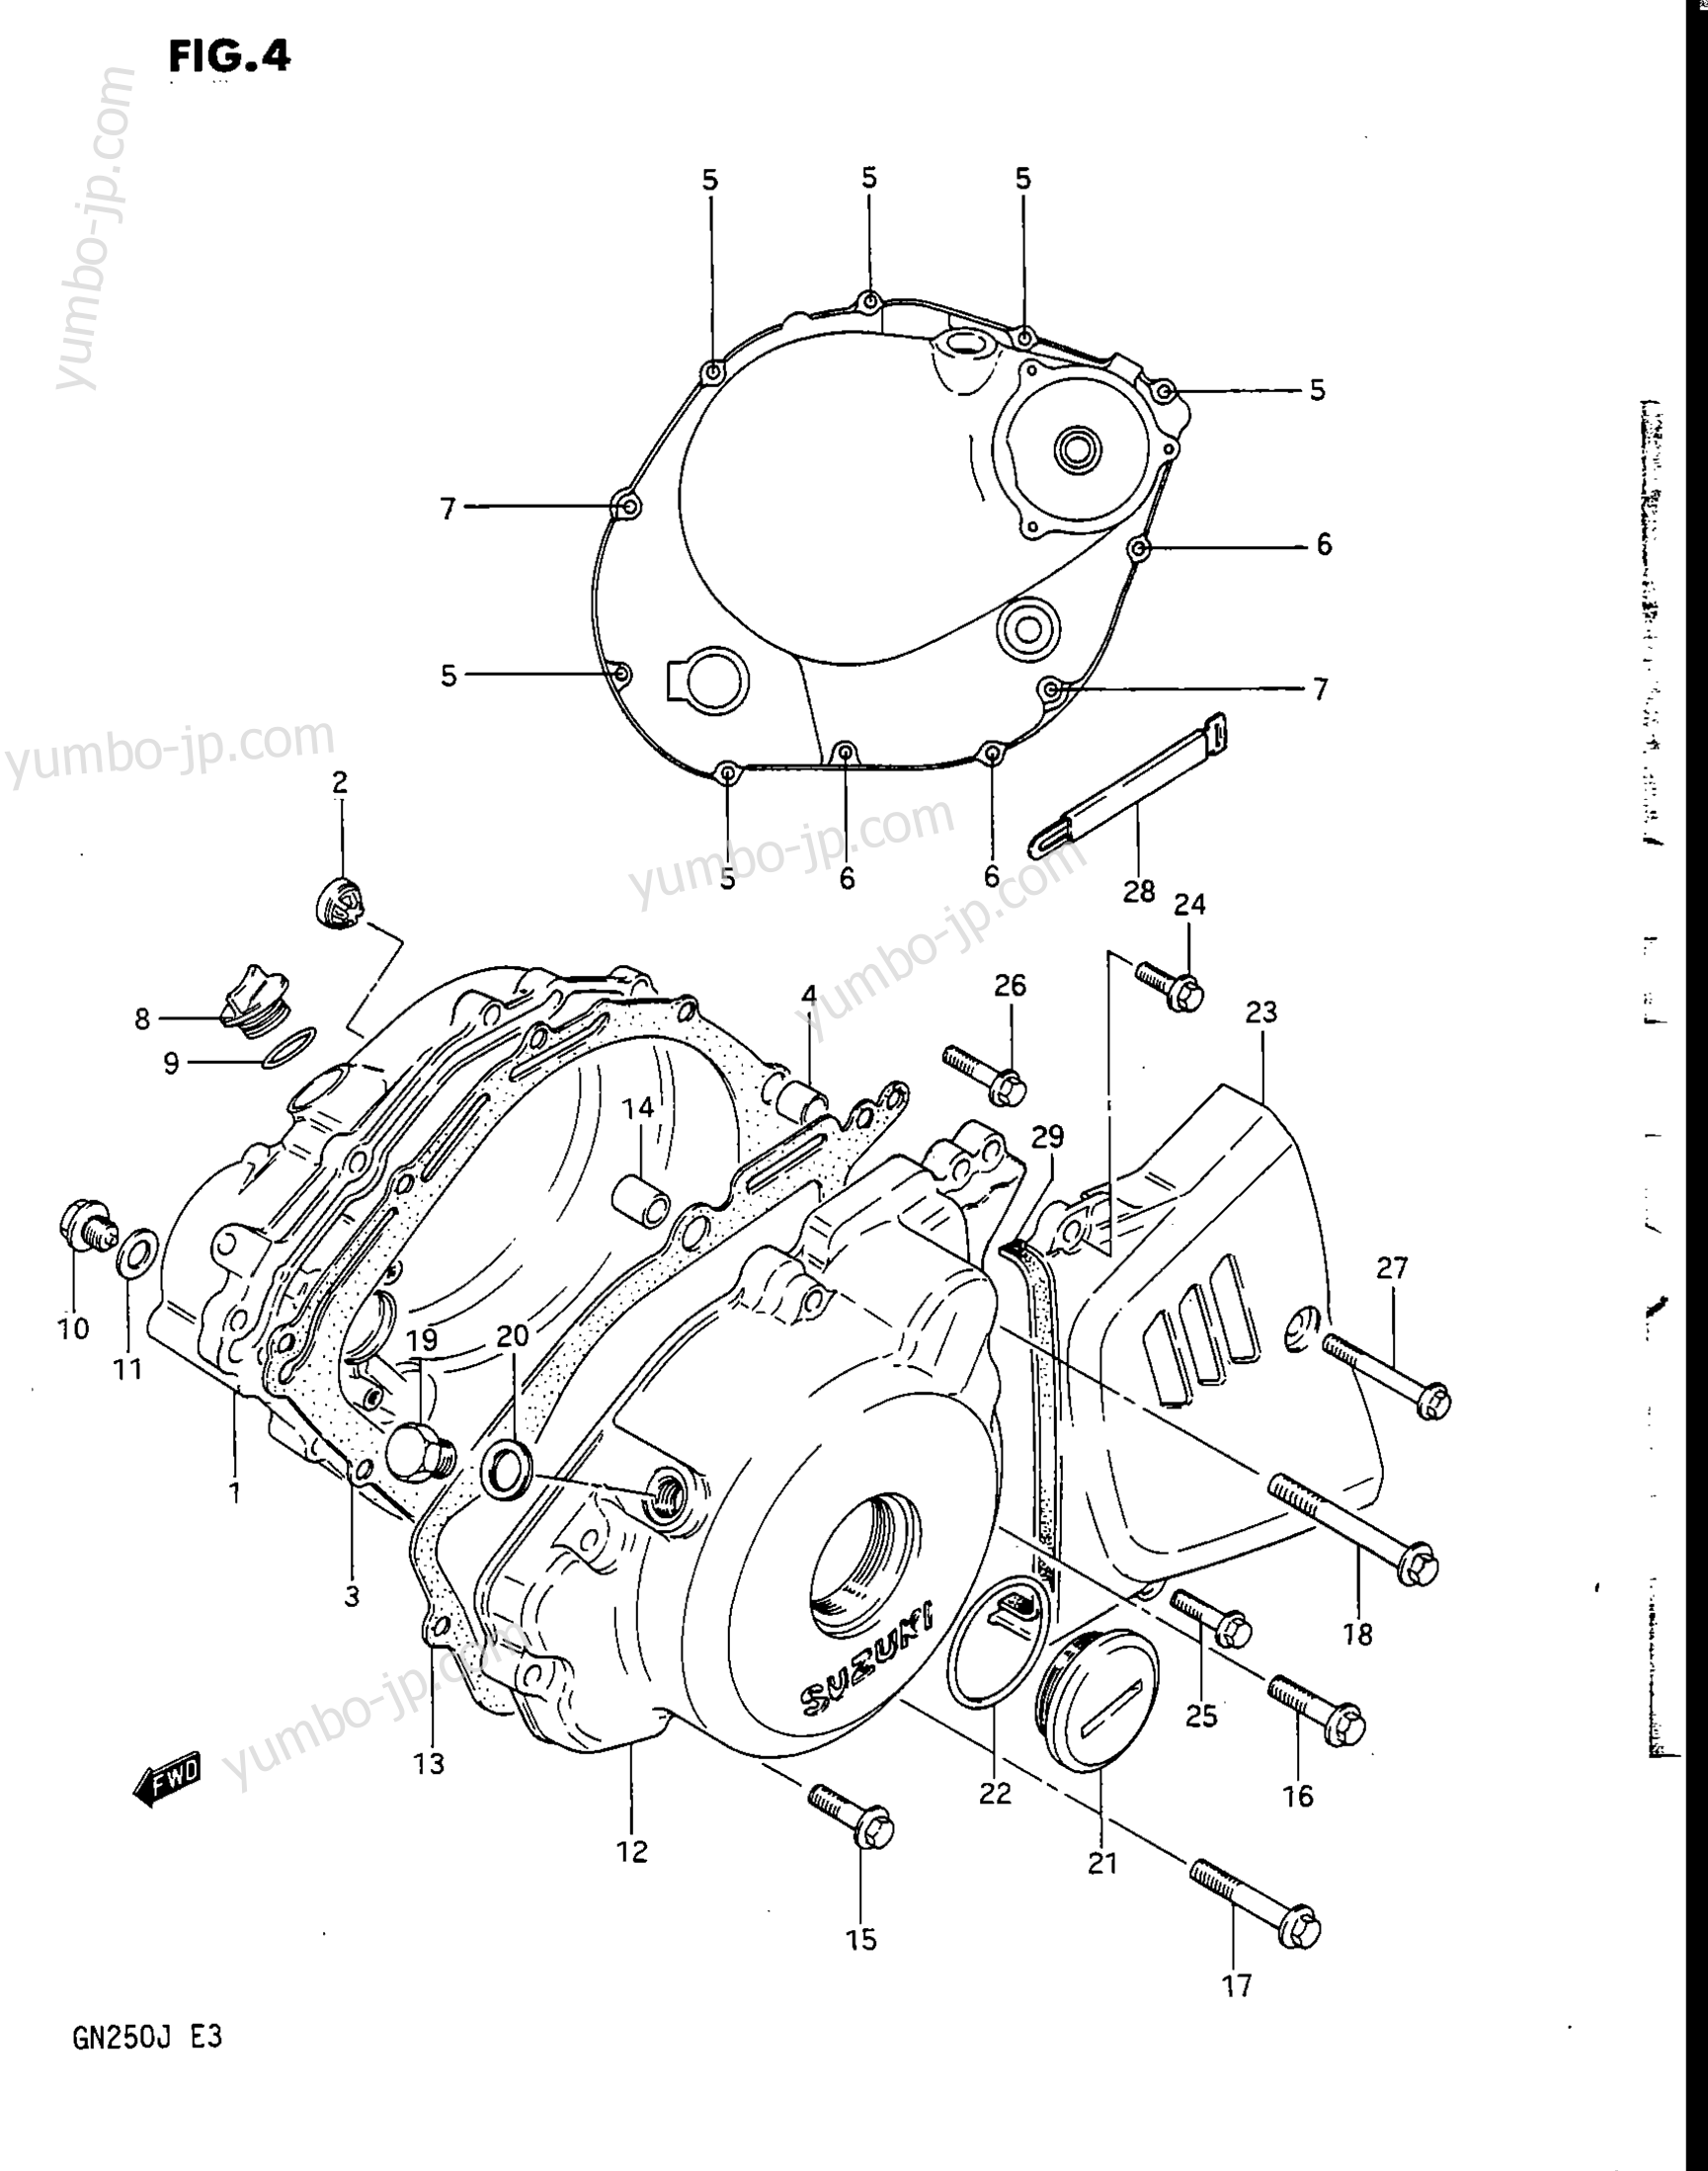 CRANKCASE COVER for motorcycles SUZUKI 1985, (GN250) 1988 year